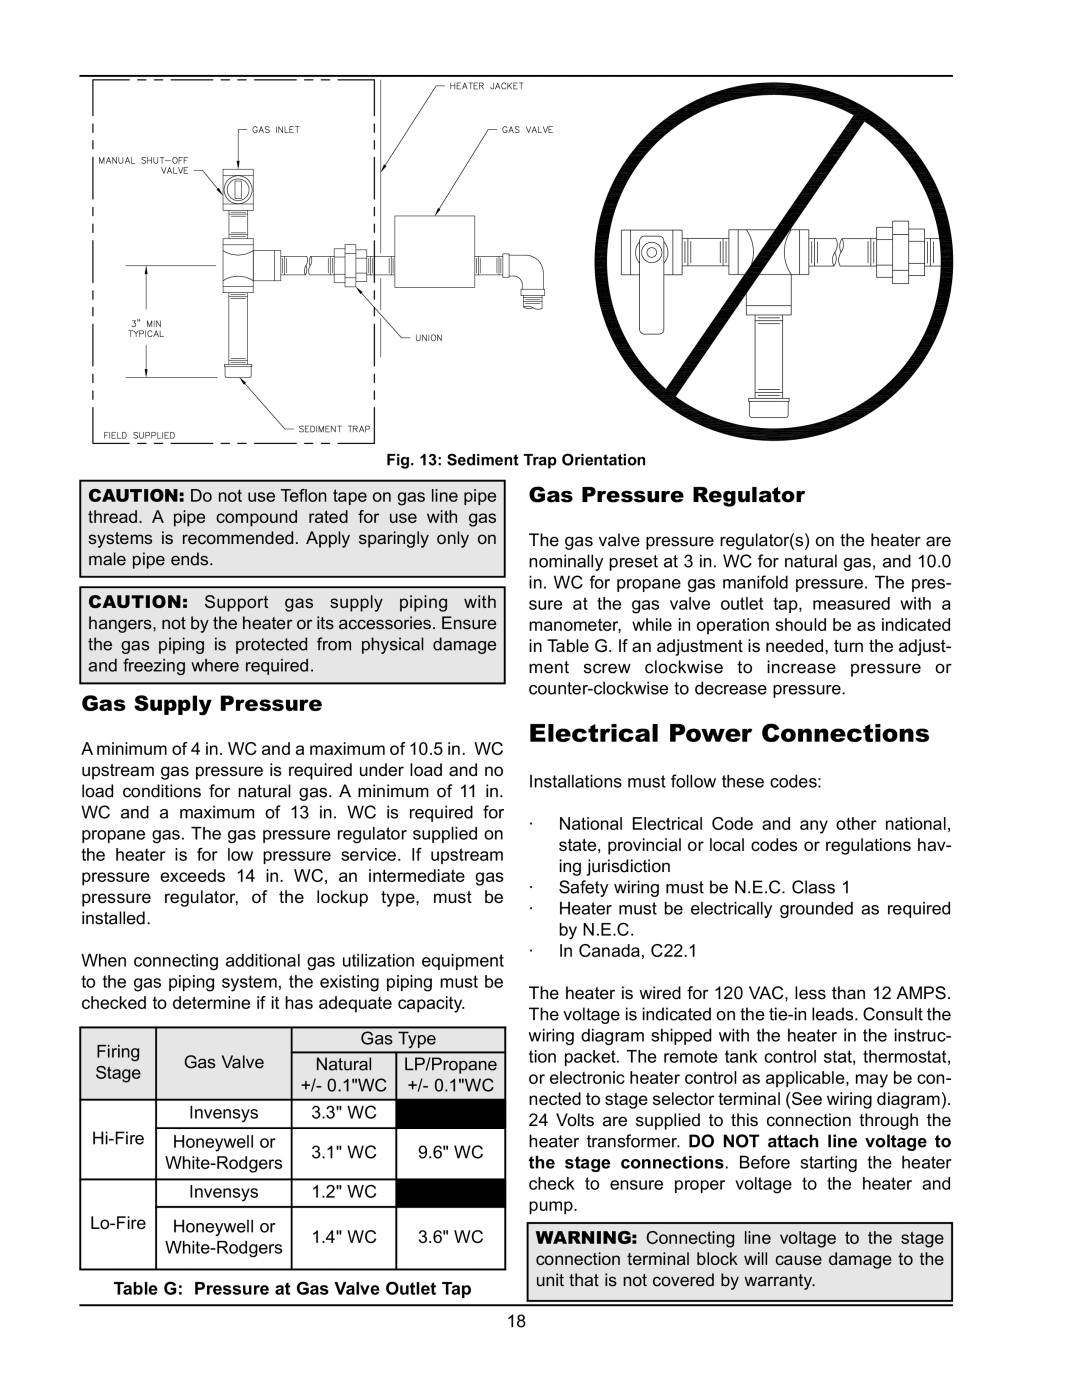 Raypak HD401, HD101 operating instructions Electrical Power Connections, Gas Pressure Regulator, Gas Supply Pressure 